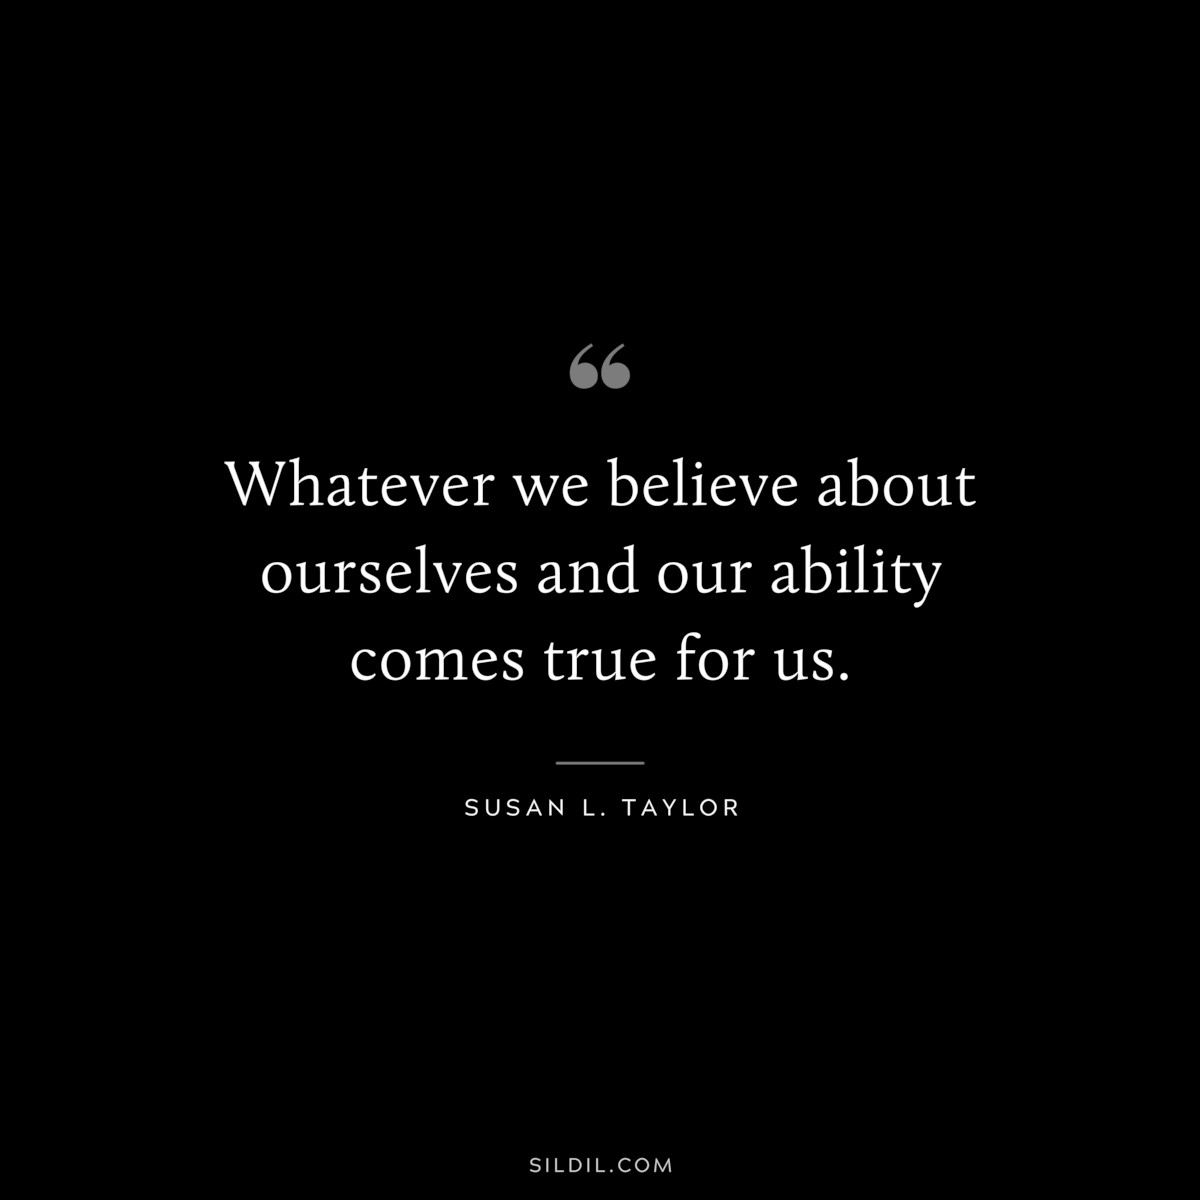 Whatever we believe about ourselves and our ability comes true for us. ― Susan L. Taylor